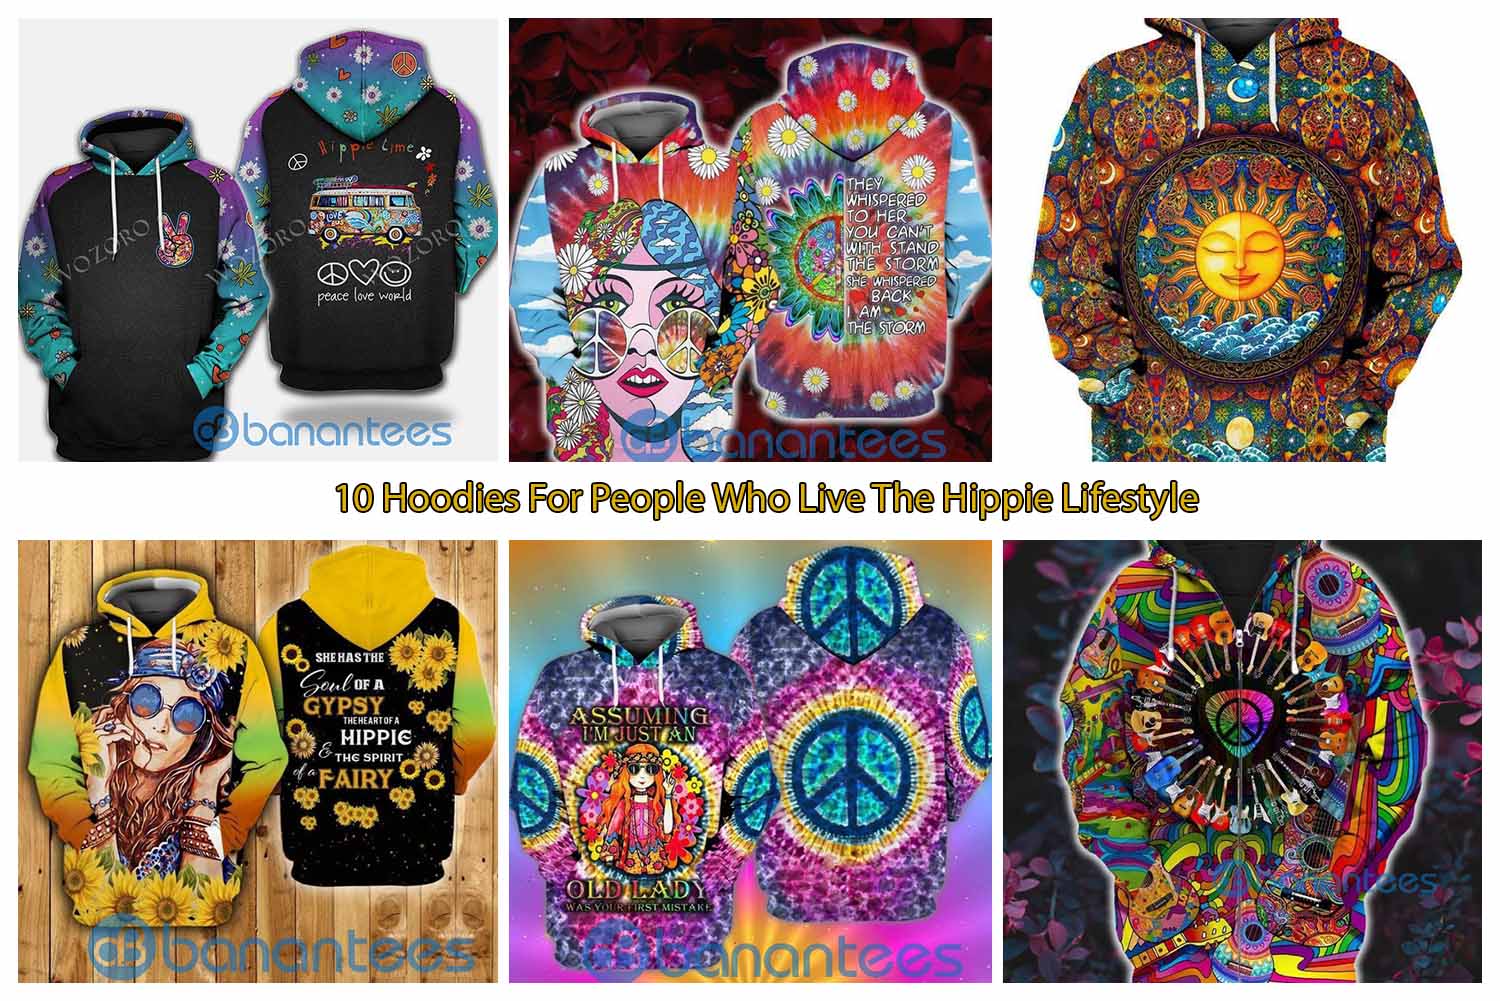 10 Hoodies For People Who Live The Hippie Lifestyle